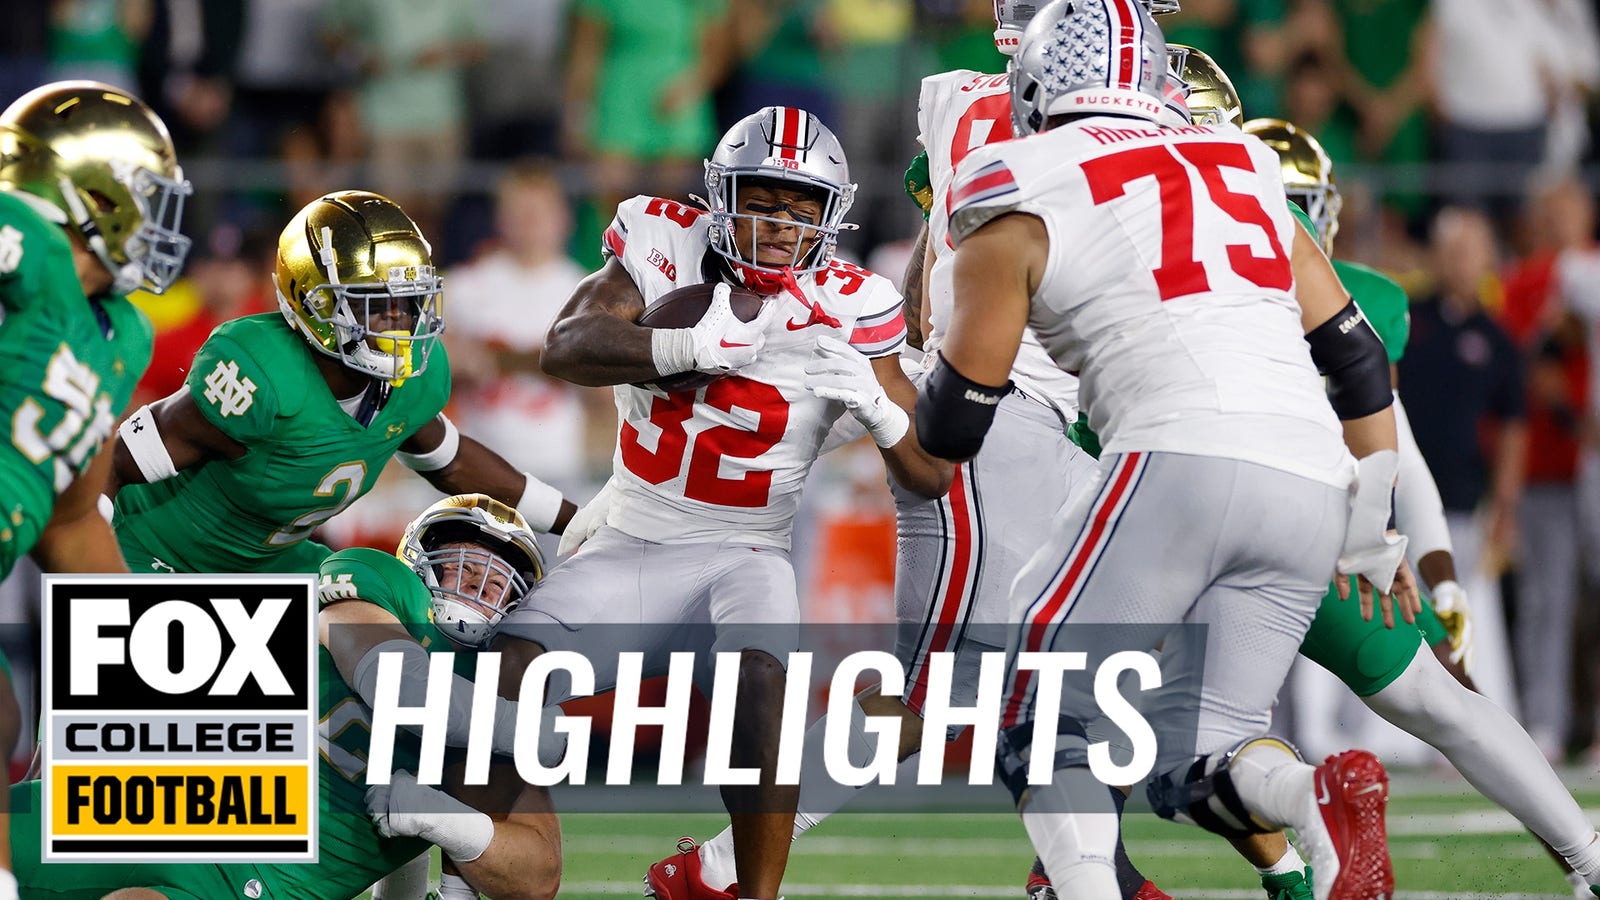 Highlights: Check out the top plays from Buckeyes' thrilling win